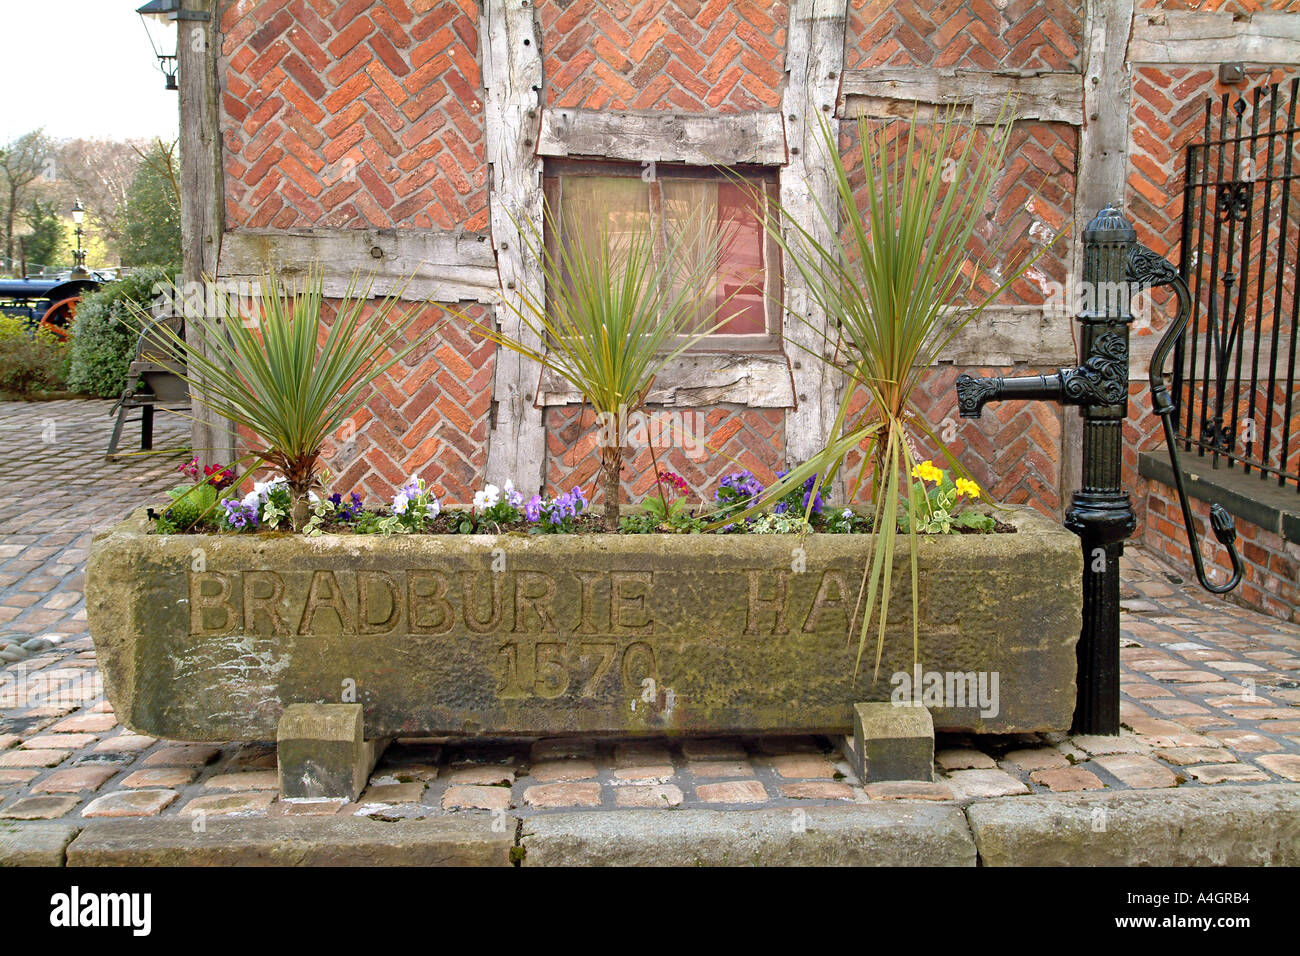 An old water pump outside the Bredbury Hotel (formerly the Bradburie Hall) near Manchester in England. Stock Photo